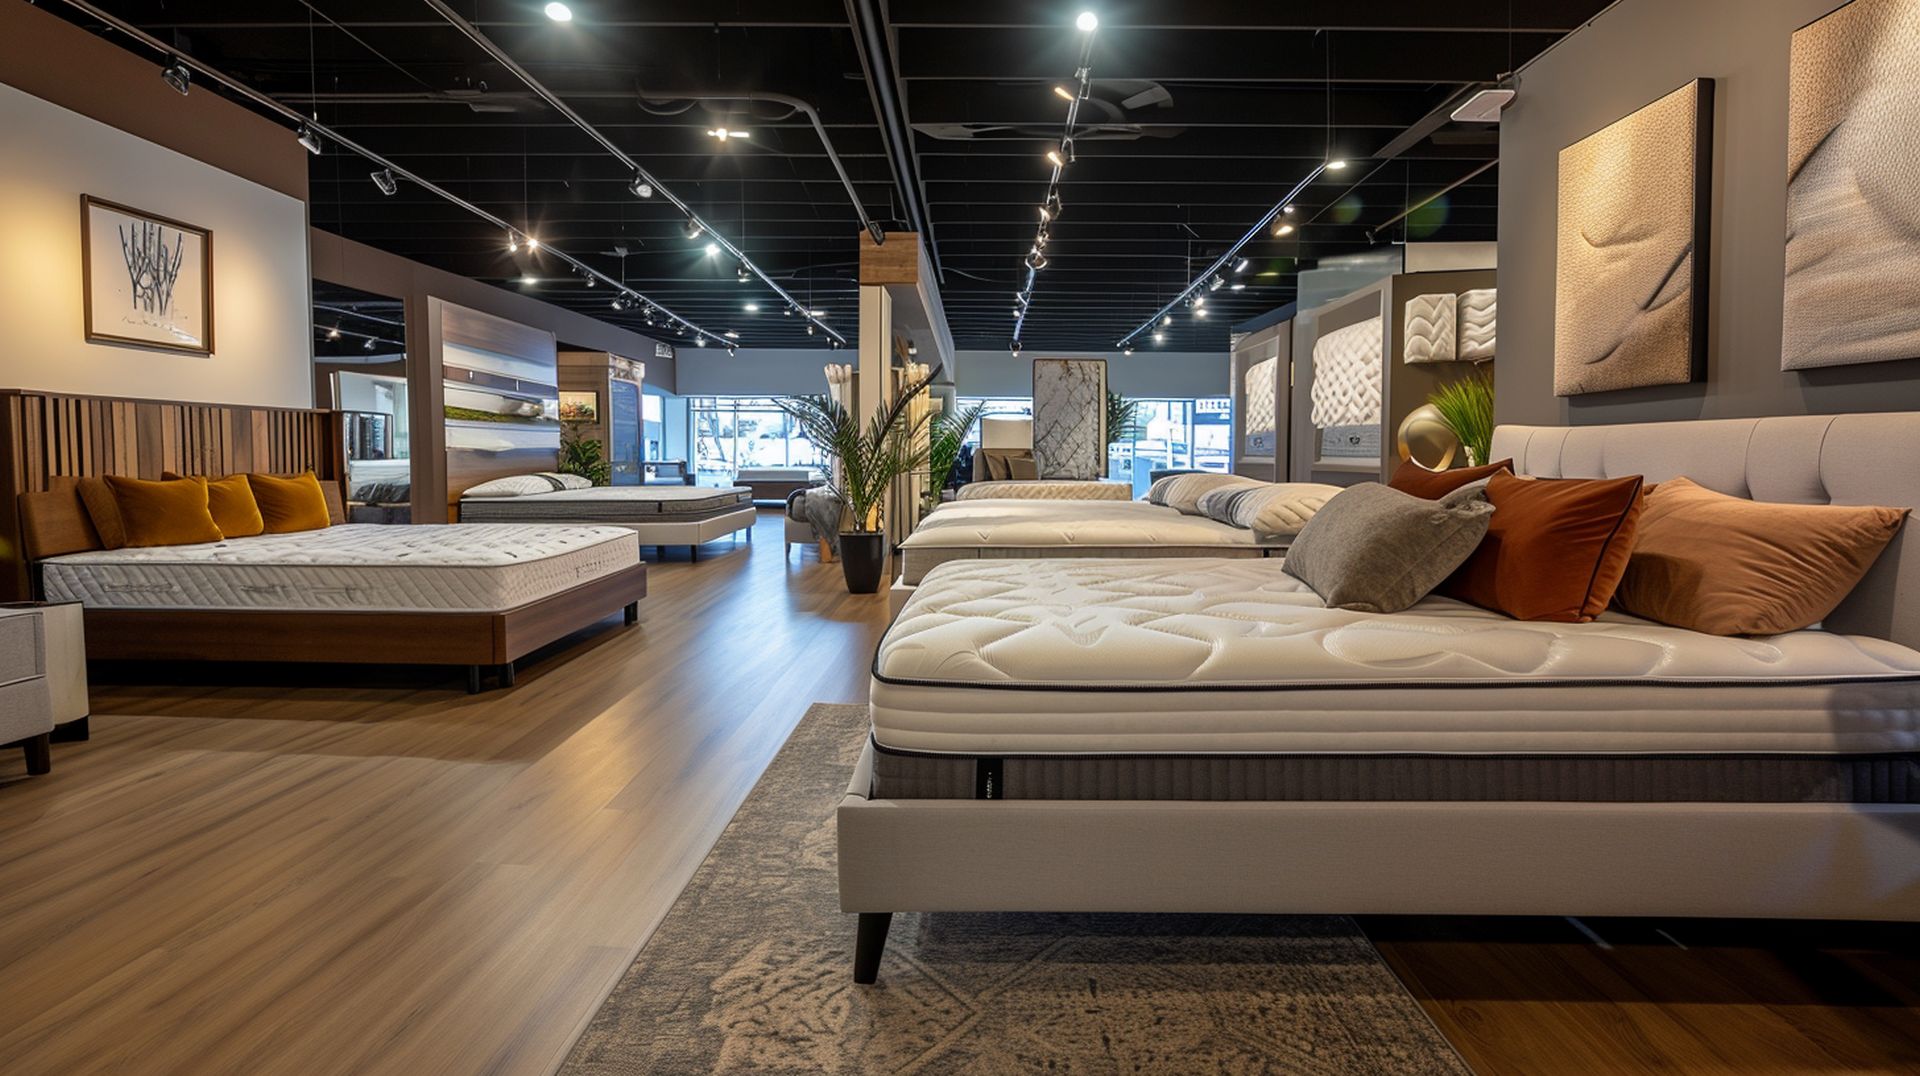 If you're looking for a new bed, mattress stores in Santa Ana offer the best customer and delivery service, financing, and warranties in California